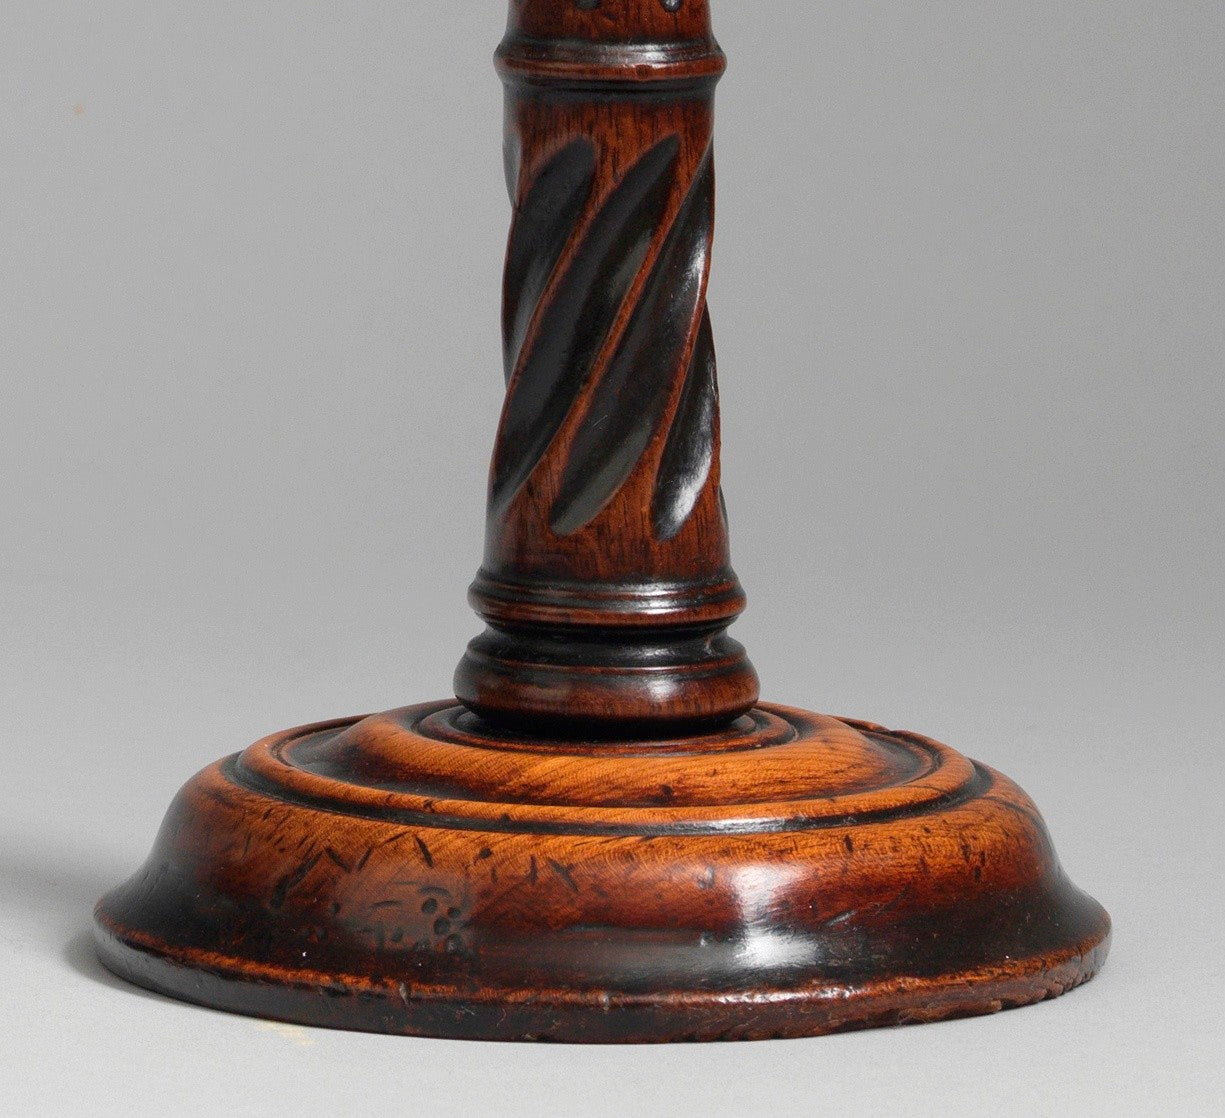 Fine Pair Of Georgian Fluted And Spiral Turned Table Candlesticks